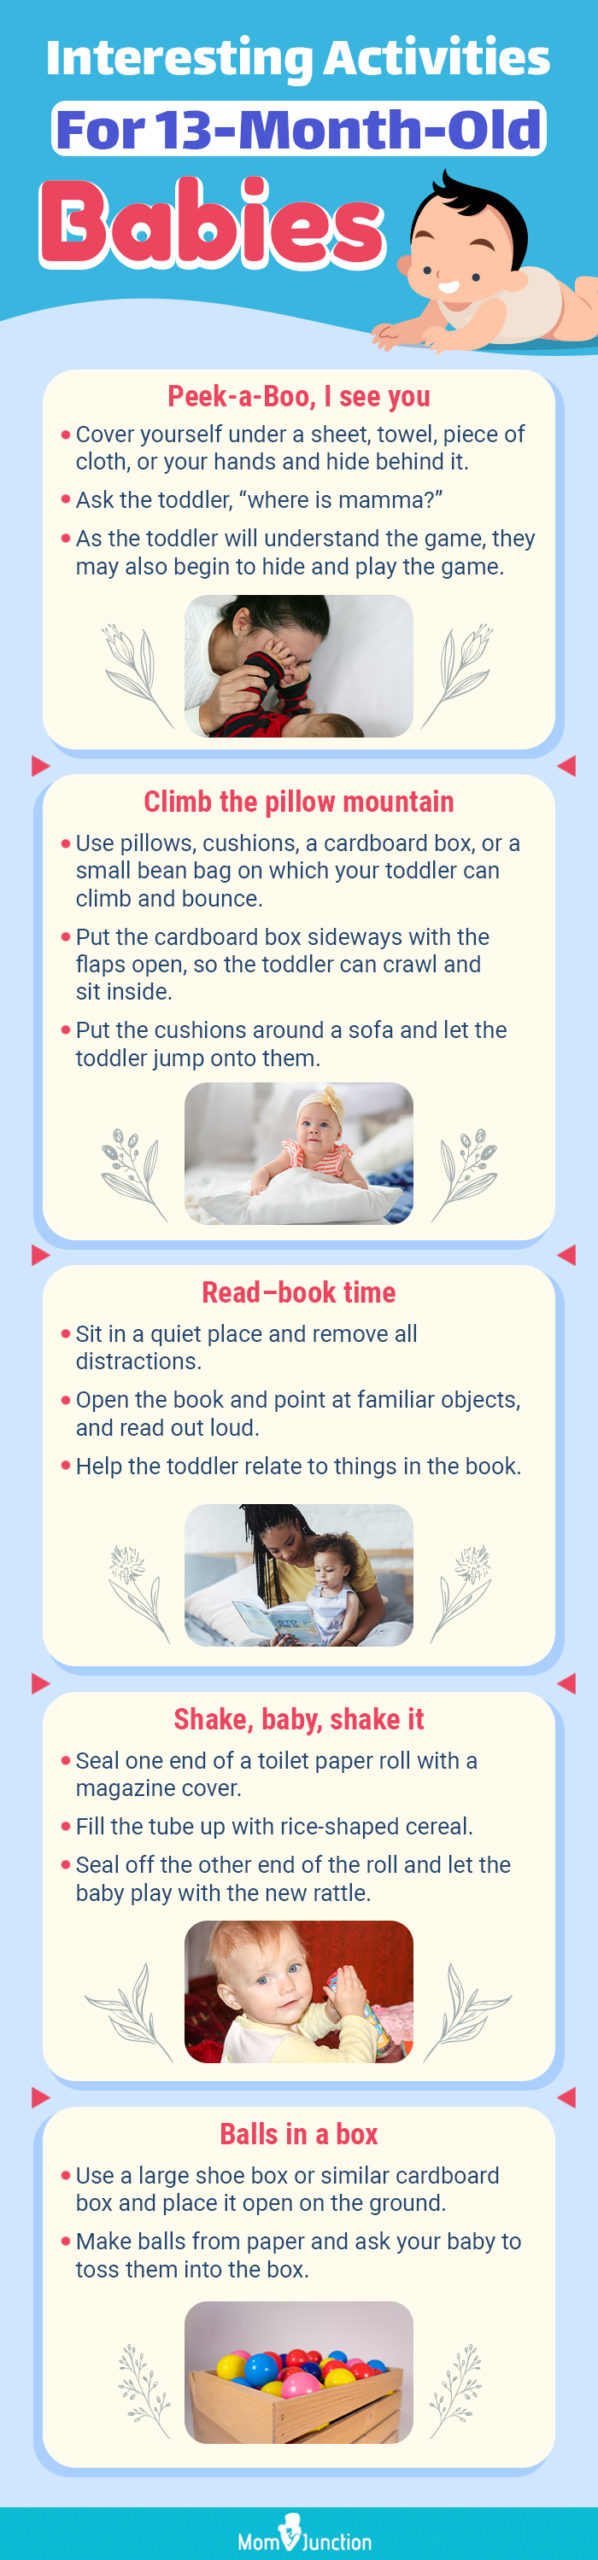 interesting activities for 13 month old babies (infographic)